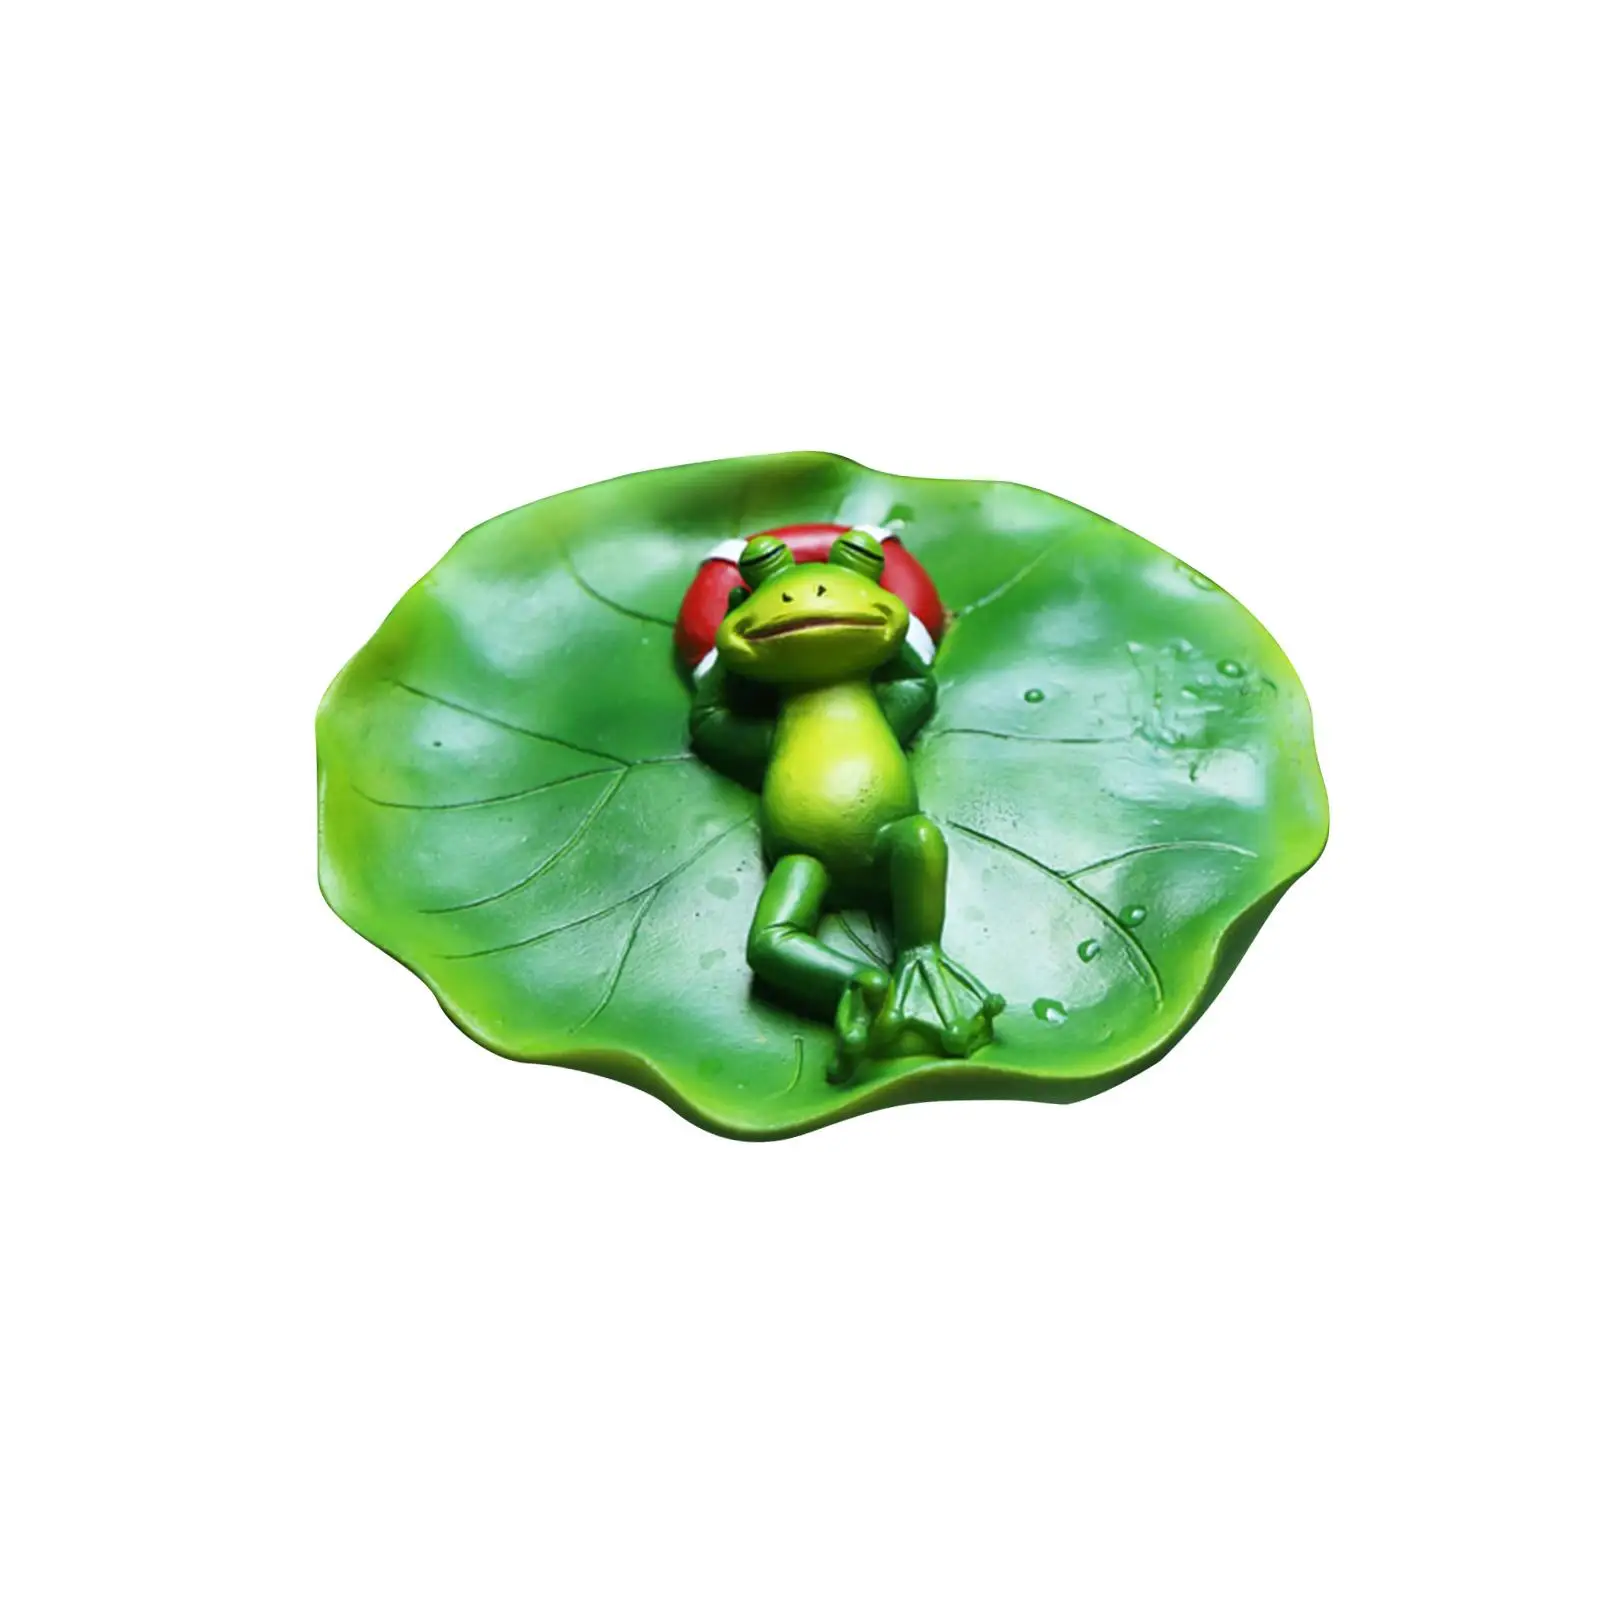 Water Floating Frog Ornament Animal Figurines Fairy Garden Statue Gift Prank Toy Pool Accessories for Outdoor Indoor Table Shelf